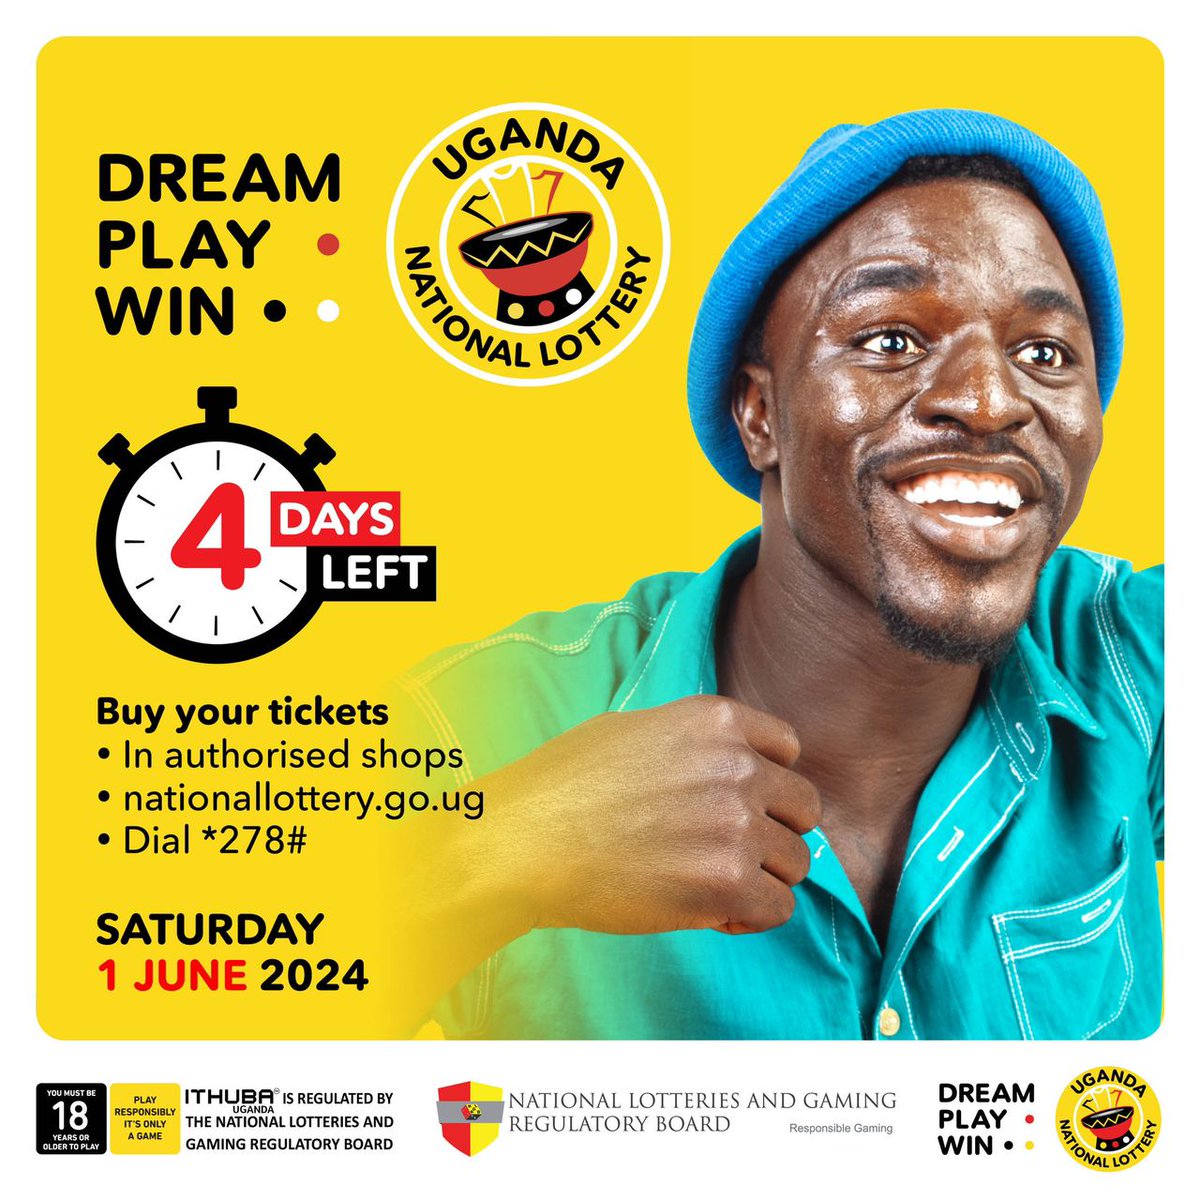 Only 4 days left! Don't miss your chance to win big with #UgandaNationalLottery! Buy your tickets now from authorized shops and imagine the possibilities. Stay tuned for upcoming draws and chances to win!